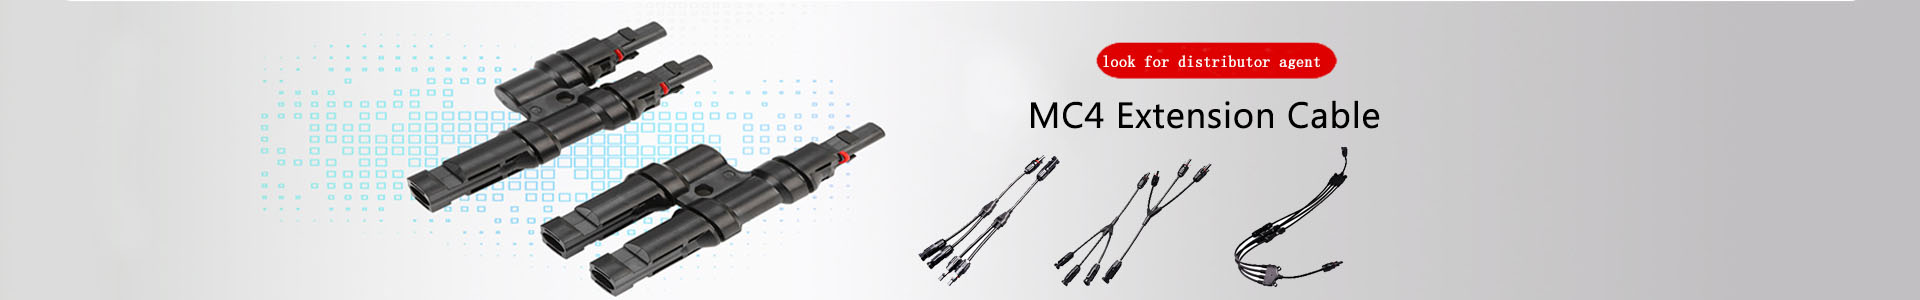 Contact US | Handwe Group-Solar | solar connector,solar branch connector,diode fuse connector,MC4 extnsion cable,H1Z2Z2 solar cable, UL4703 solar cable | Leading manufacturer and supplier of solar pv cables and connectors